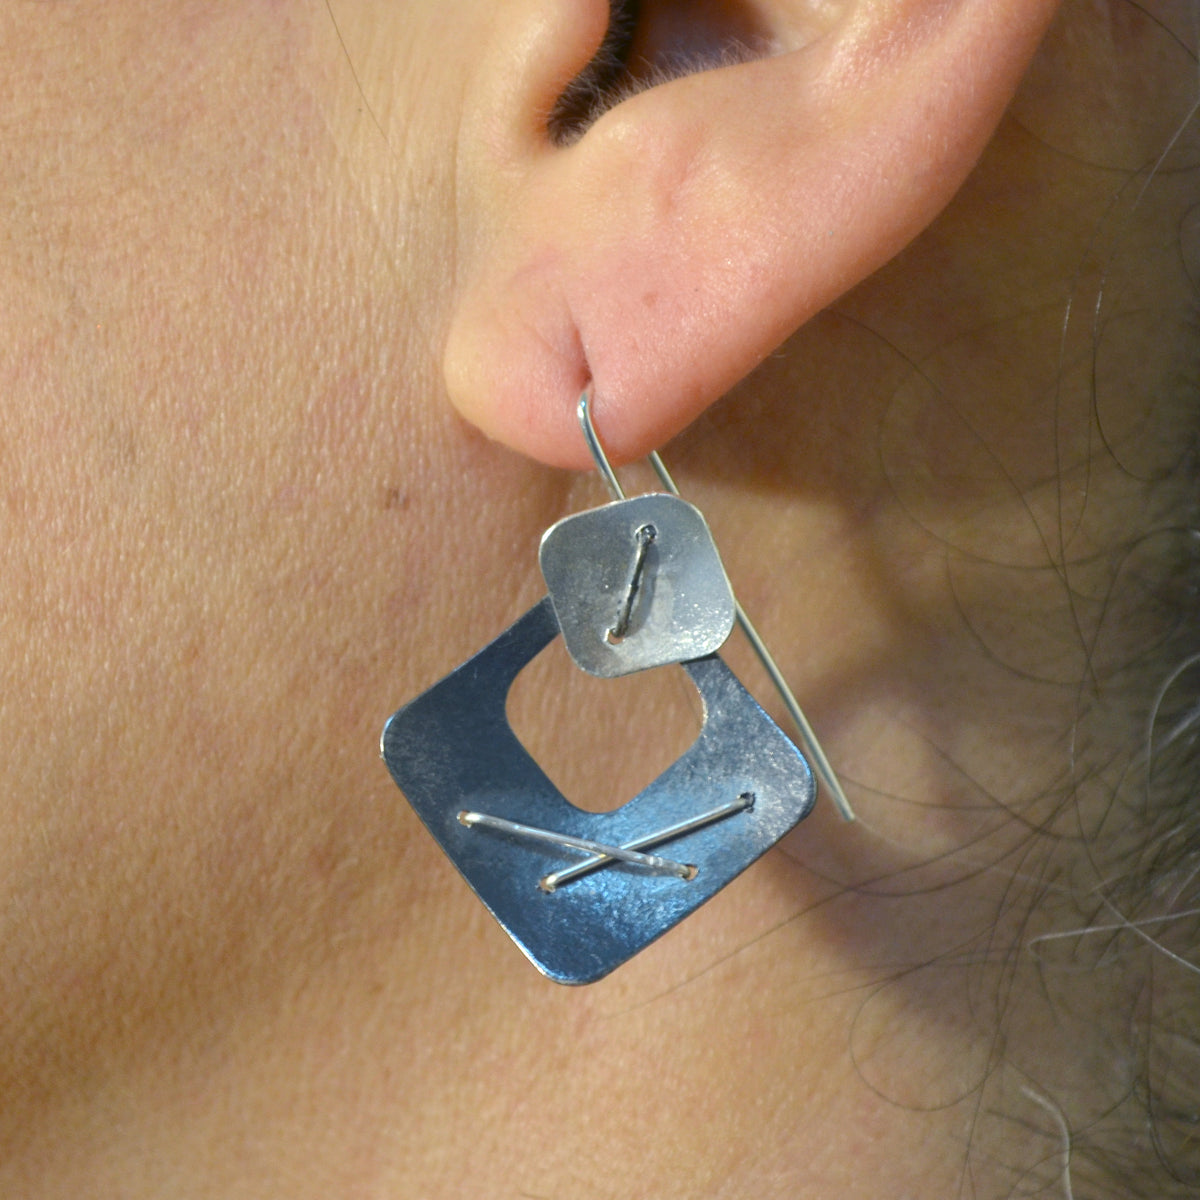 Two Square Layered Earrings